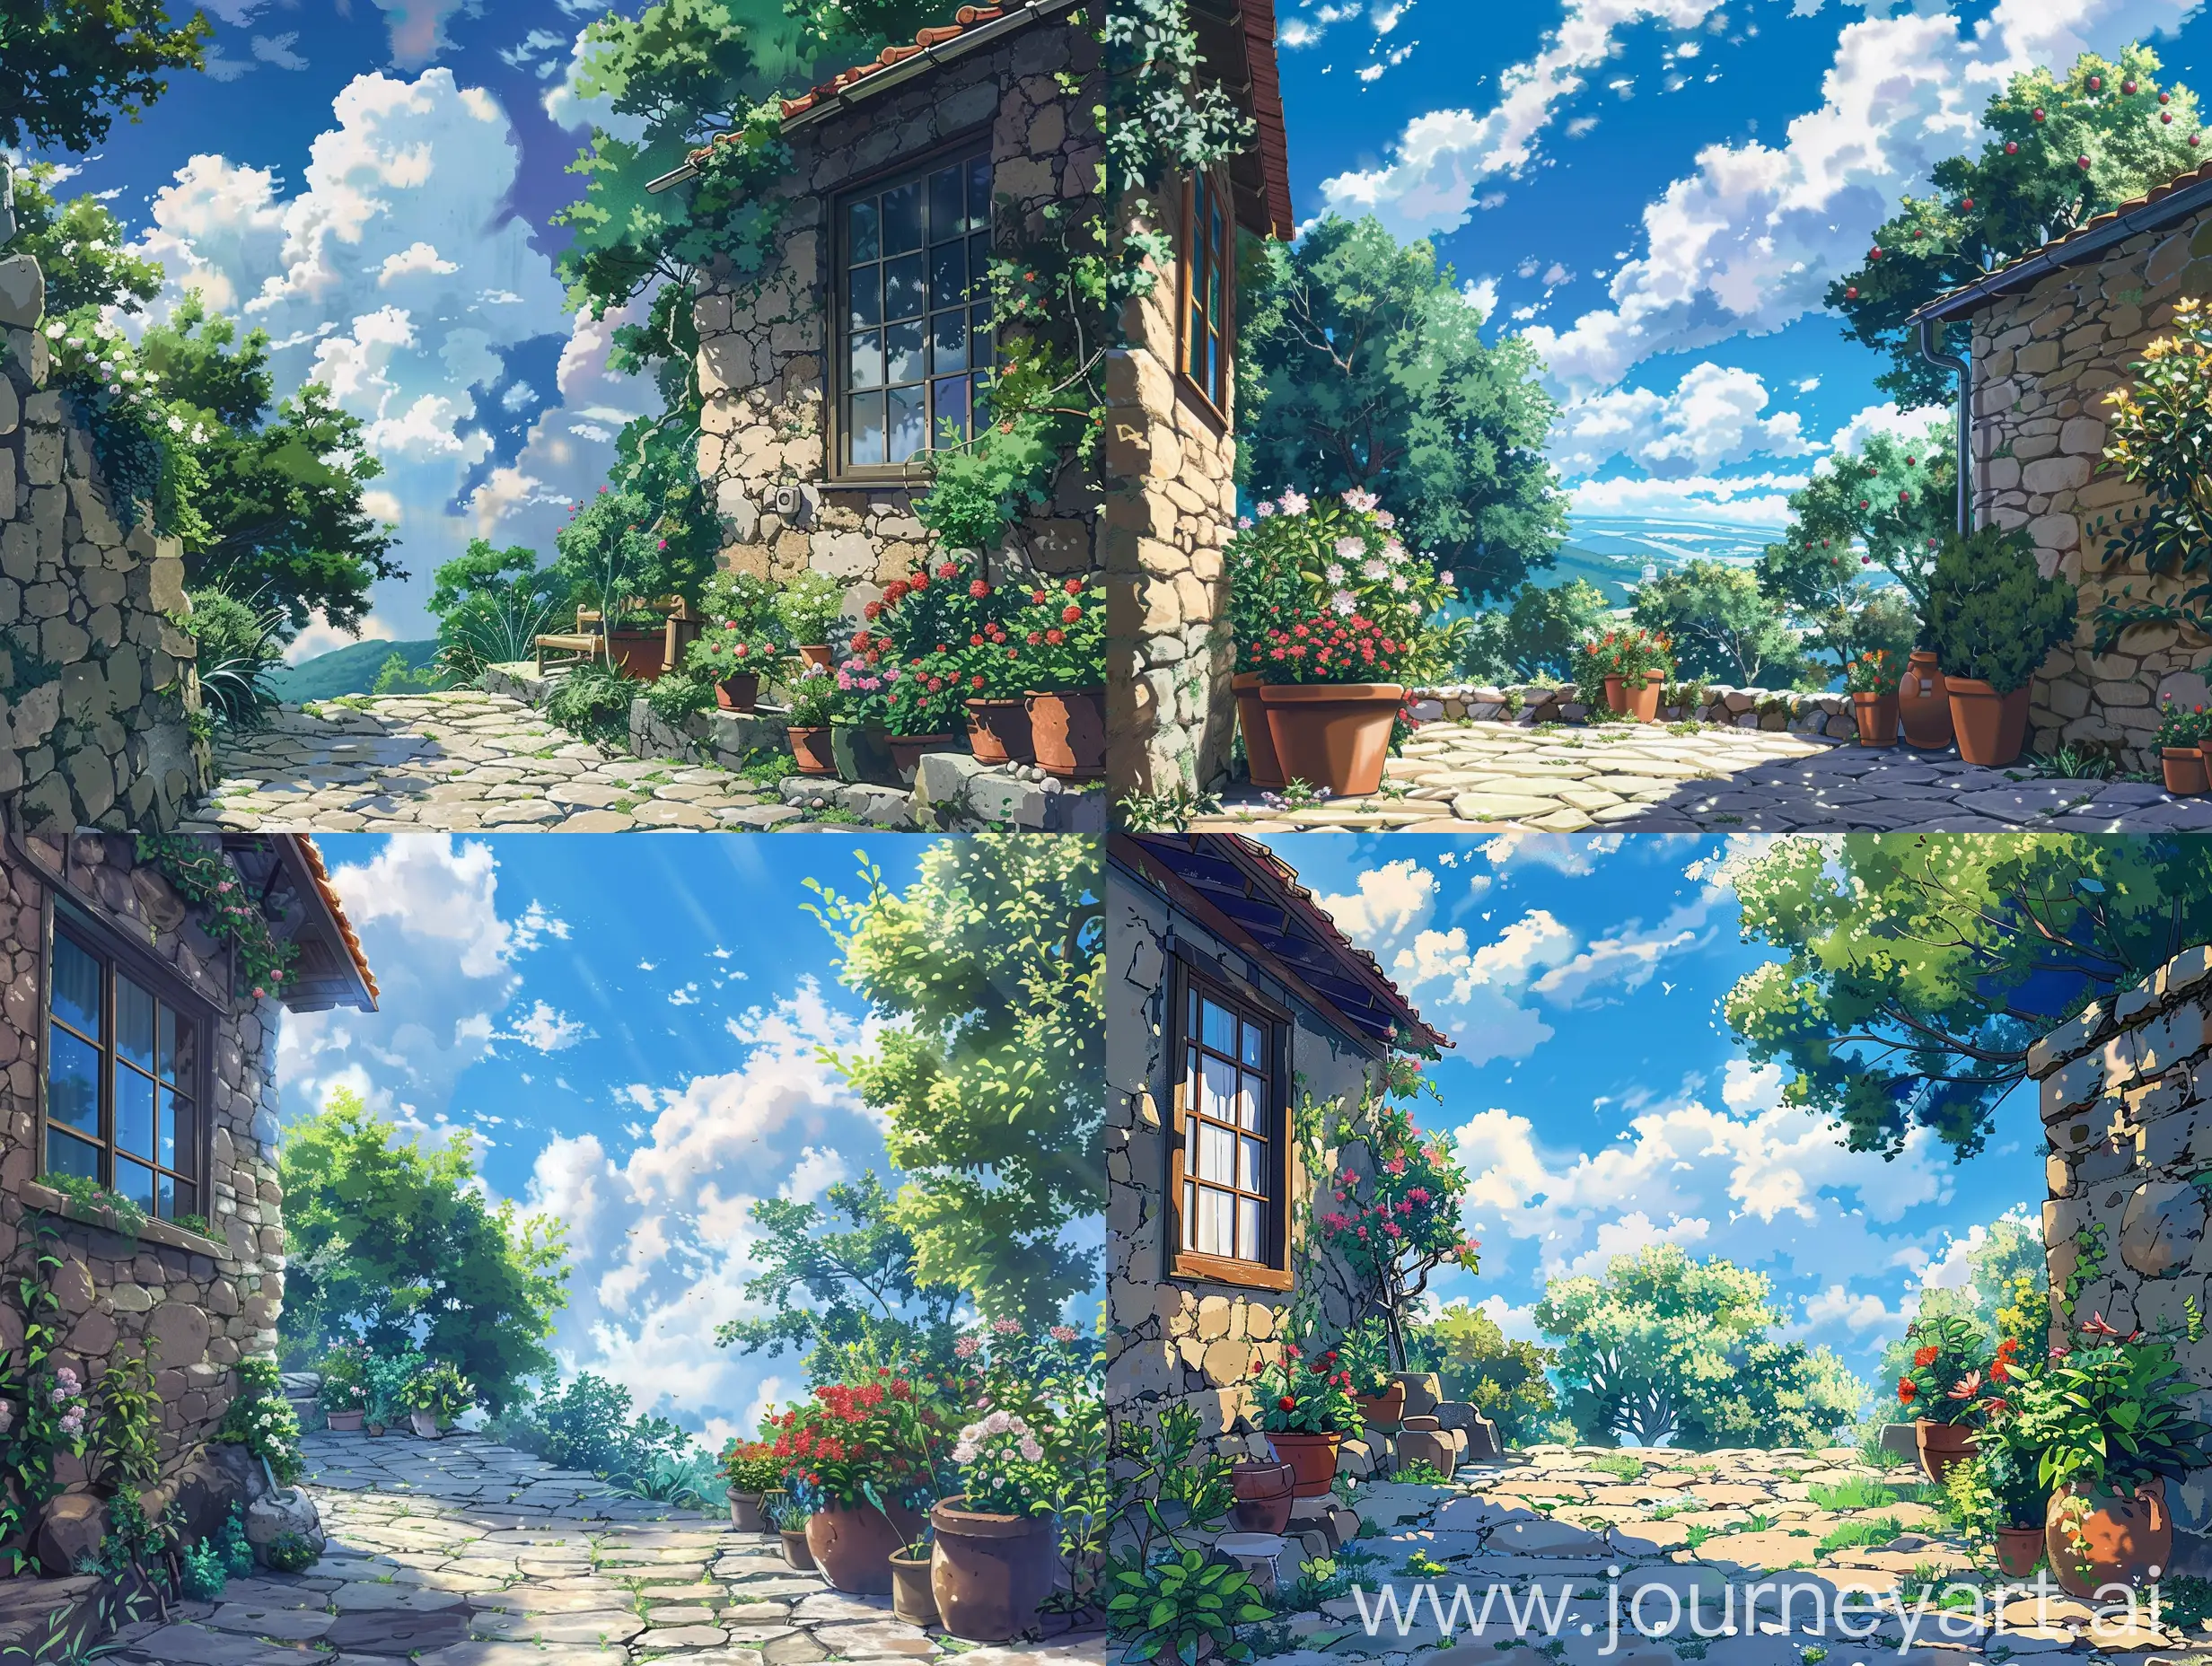 Beautiful anime scenery,Makato Shinkai with mix of Ghibli style,a small cozy house of stone with view with a window with some trees around,beautiful sky with fluffy clouds,nostalgia vibes,a stone path which looks beautiful,some flower pots and plants are there alongside the path just a little bit of garden look.